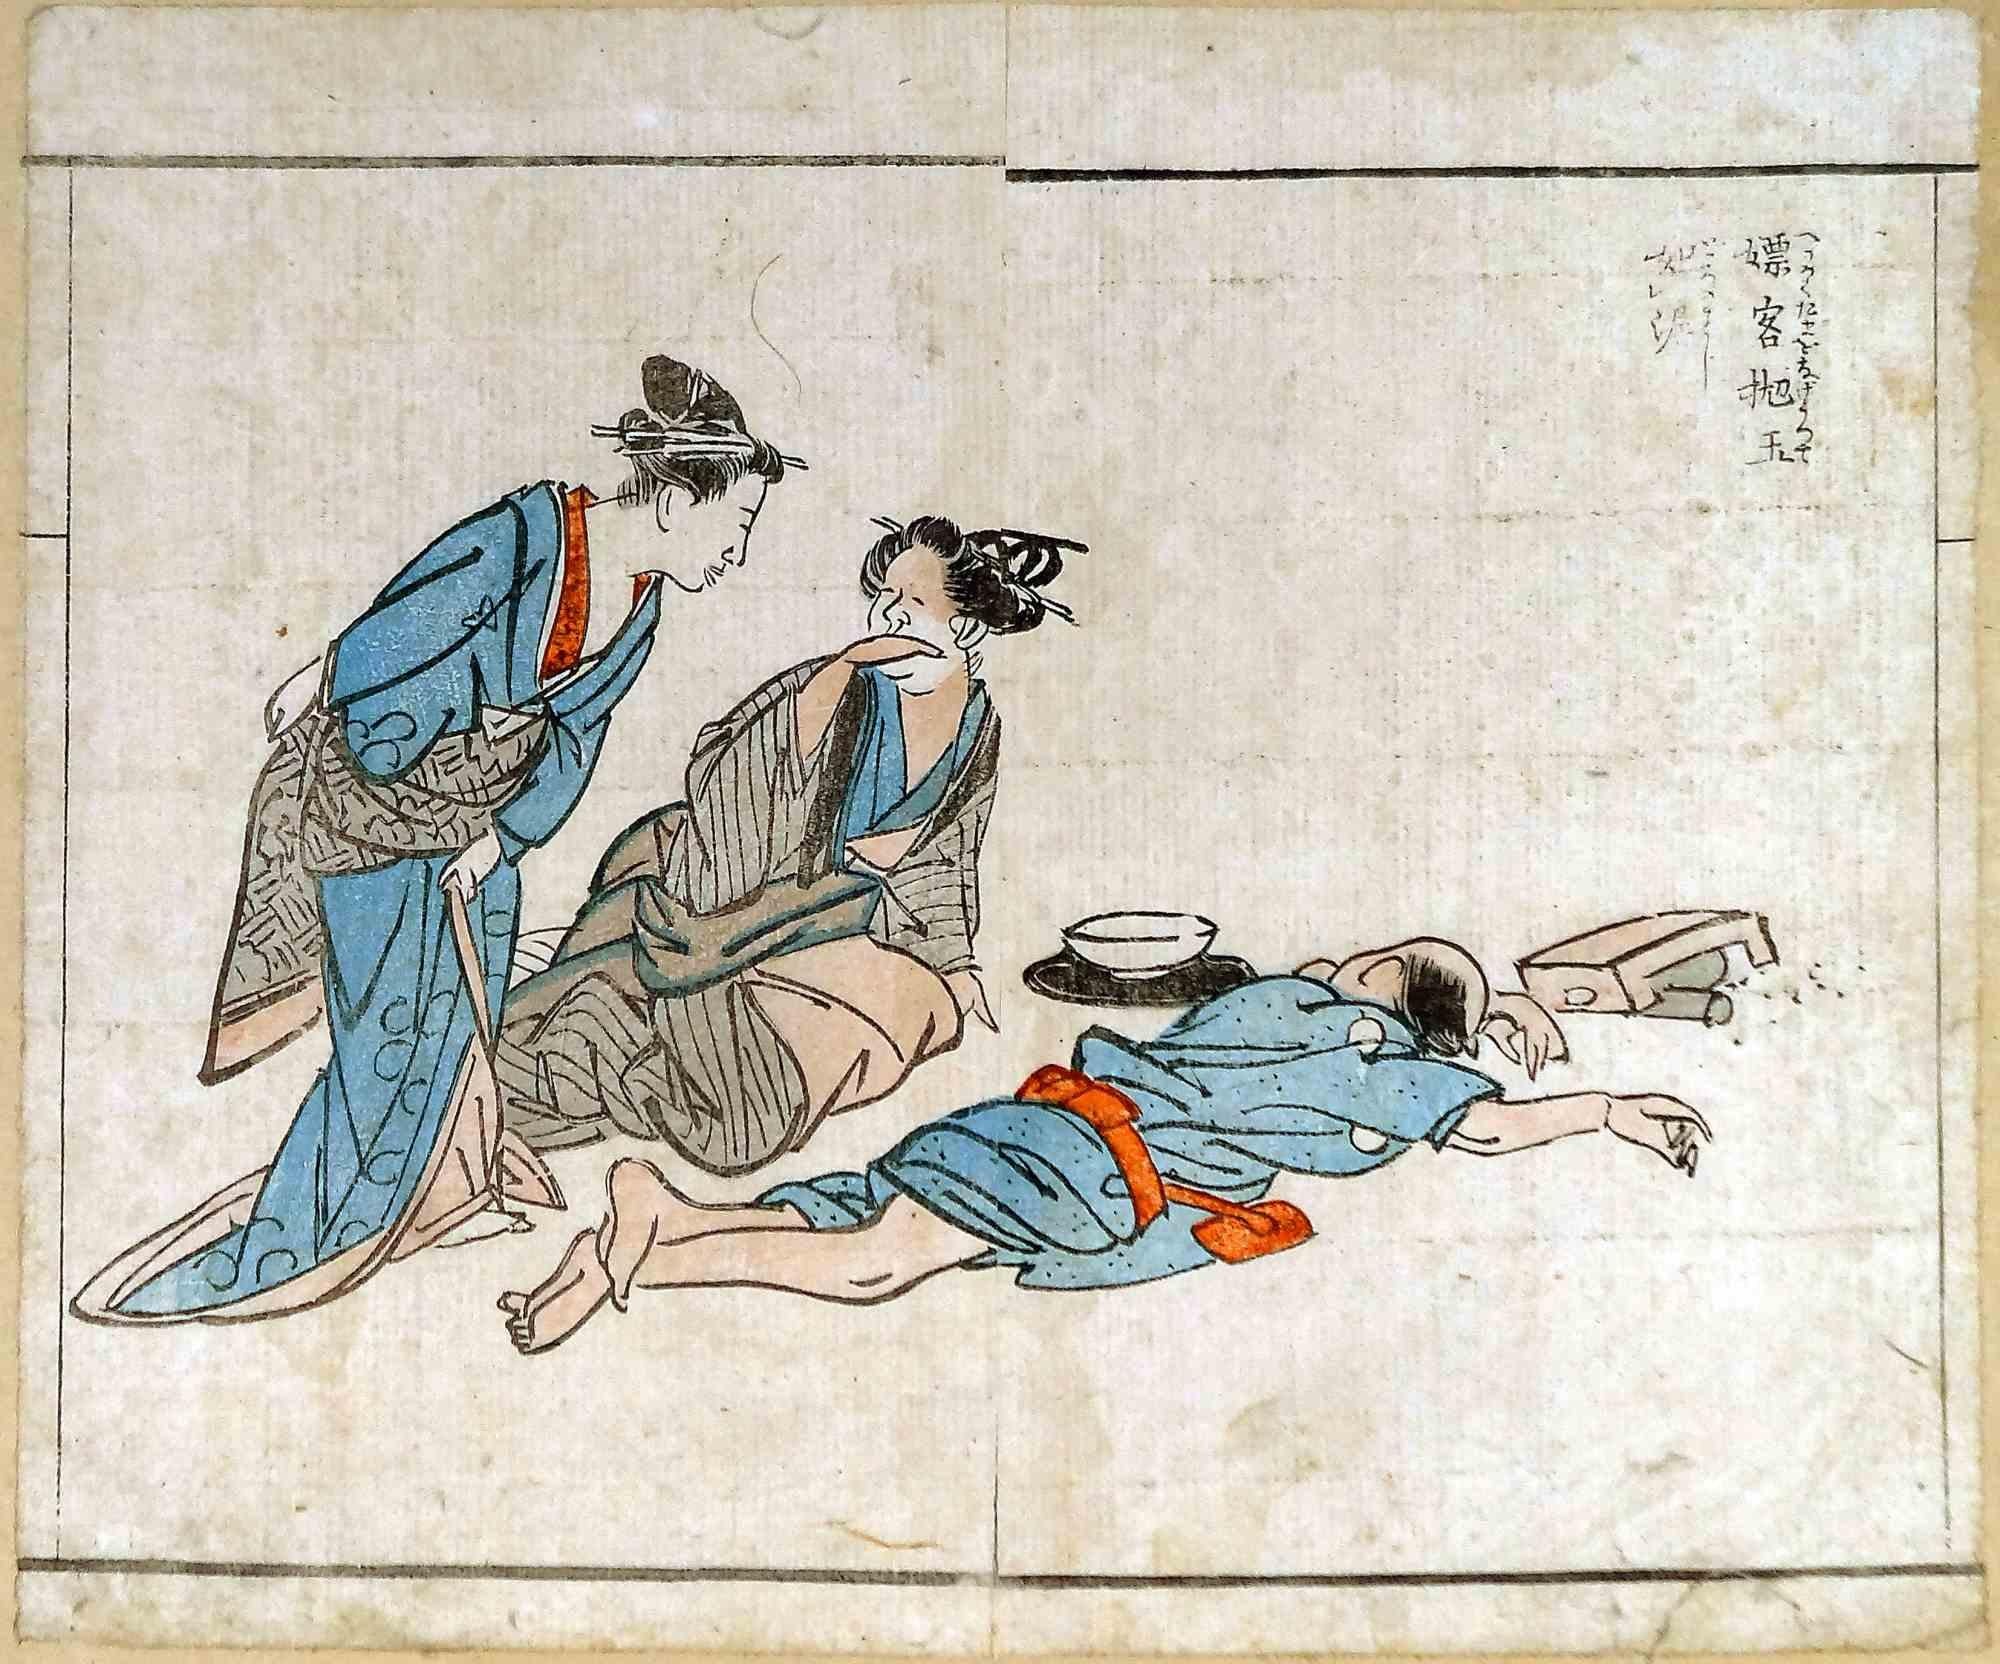 Unknown Figurative Print - Stupor of the Geishas - Woodcut - Late 18th Century